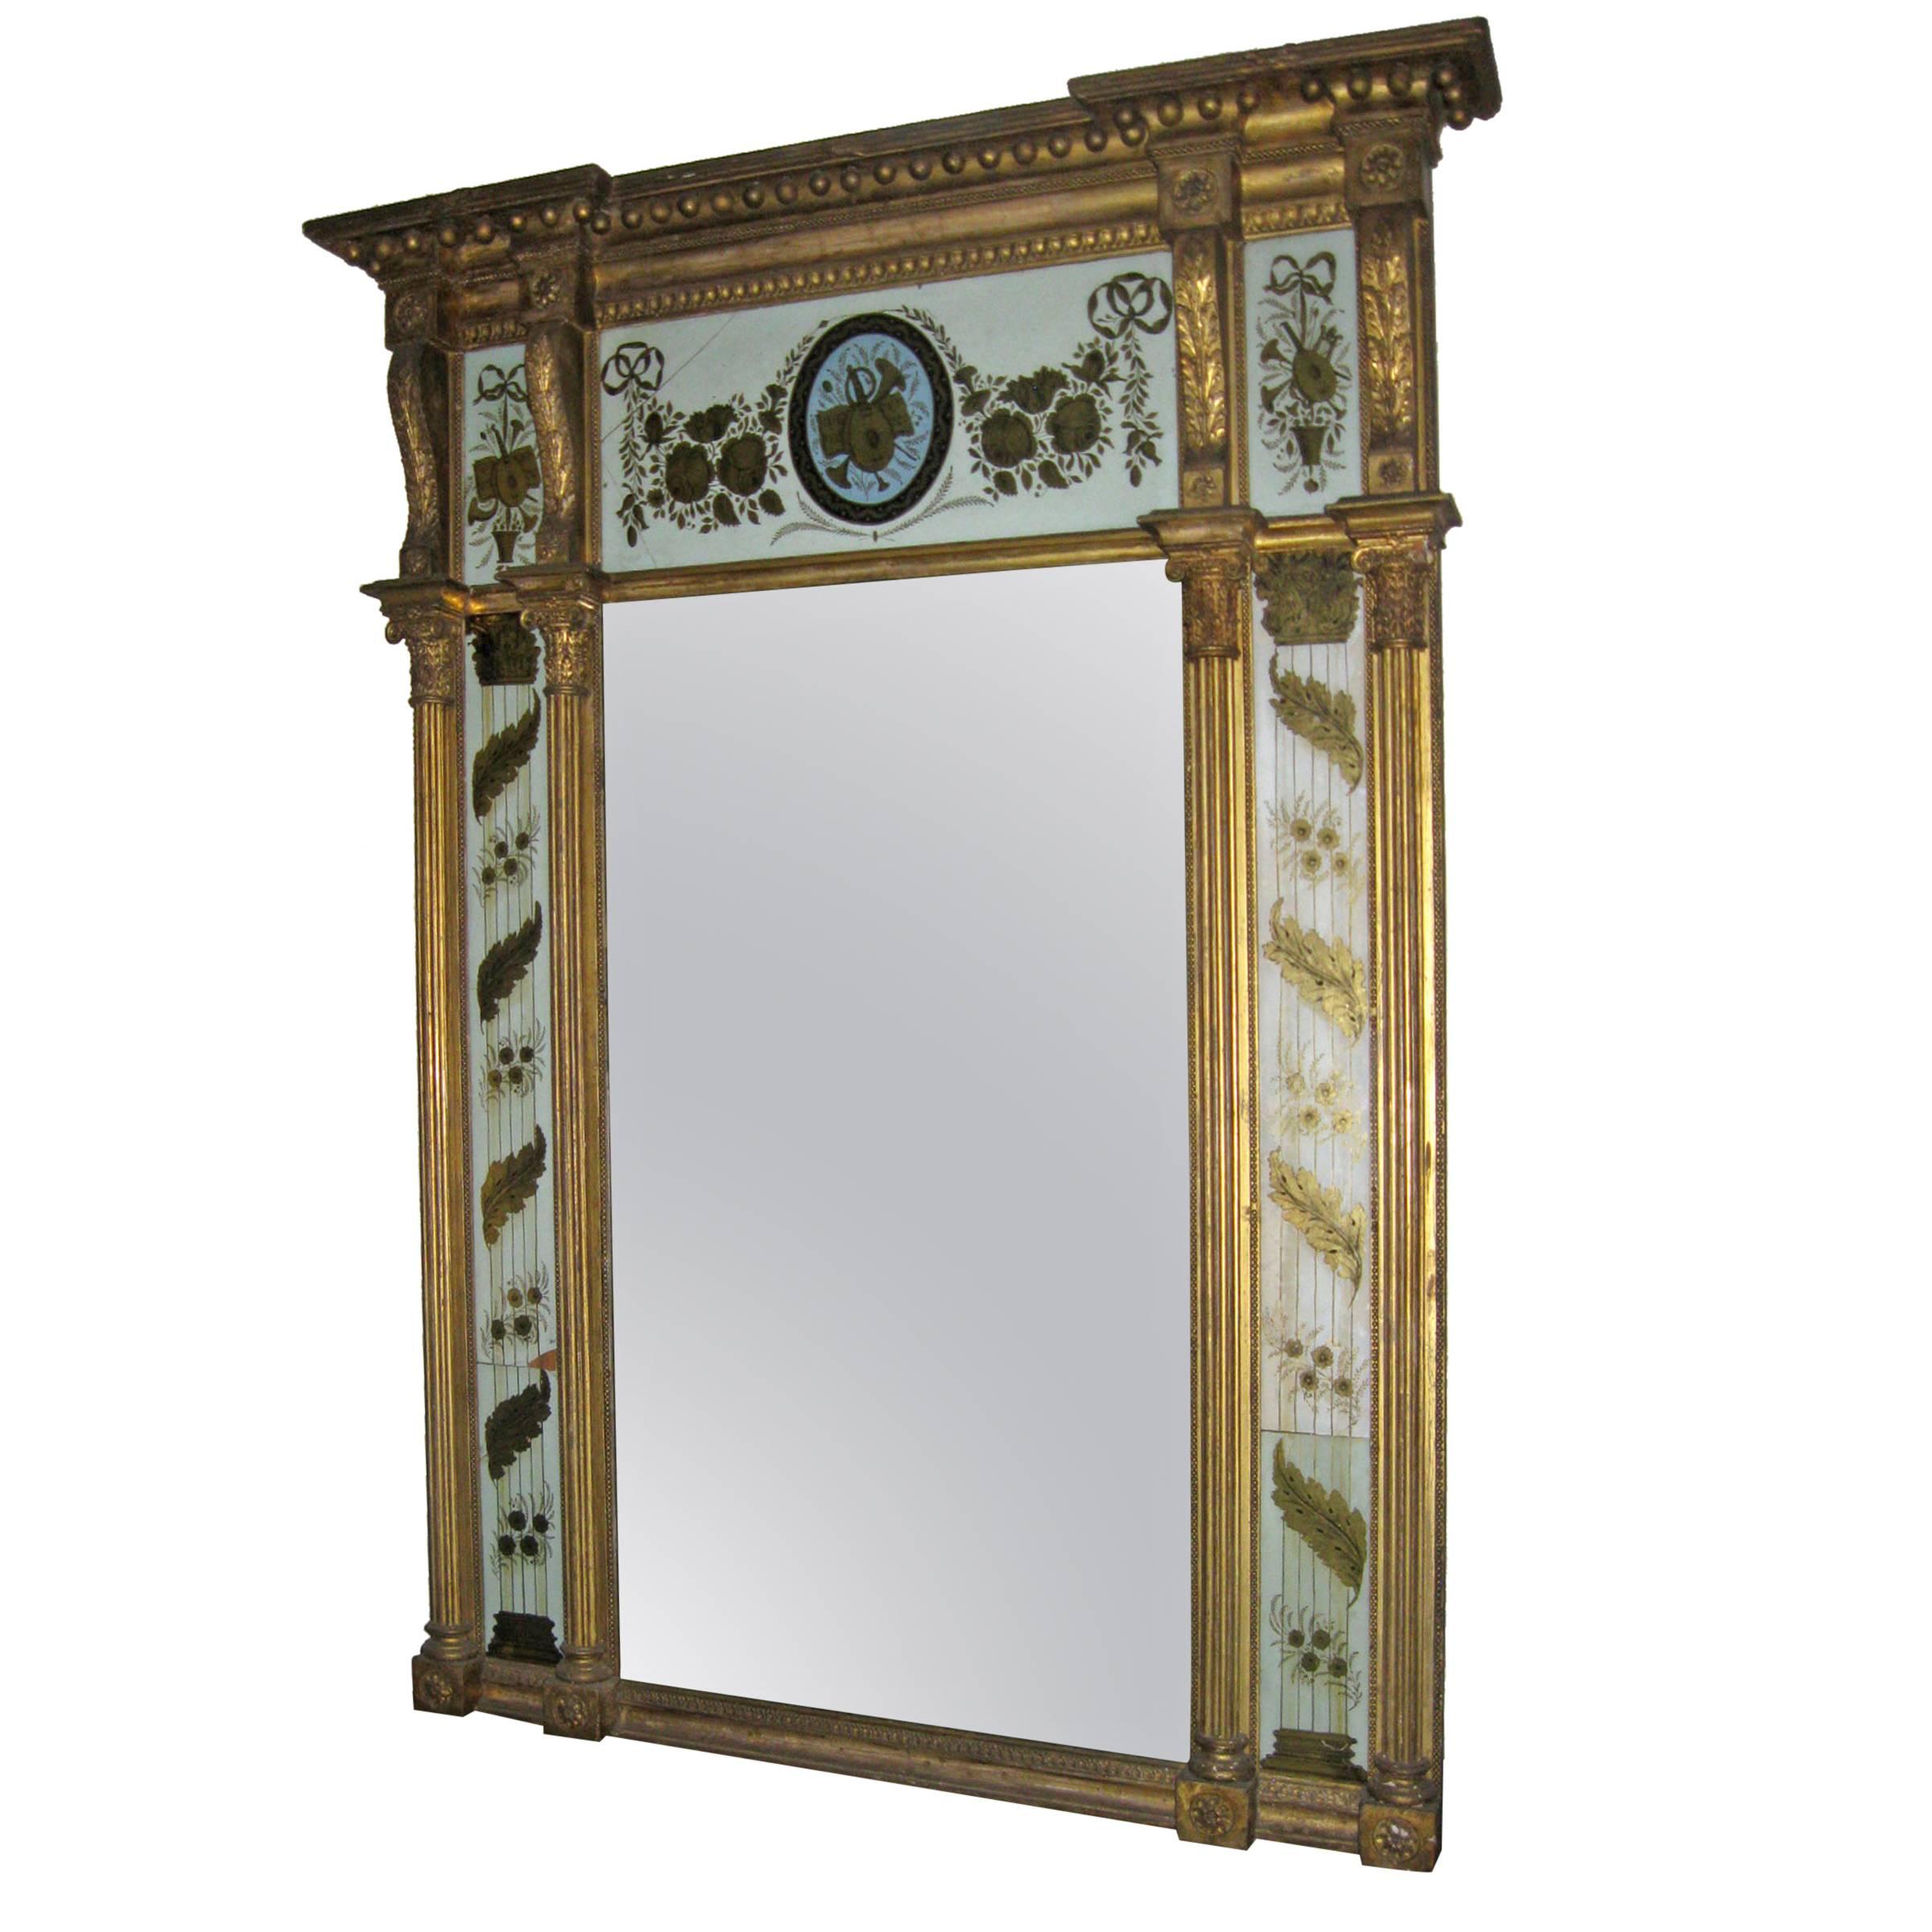 19th century American Classical Federal Monumental Eglomise Overmantel Mirror